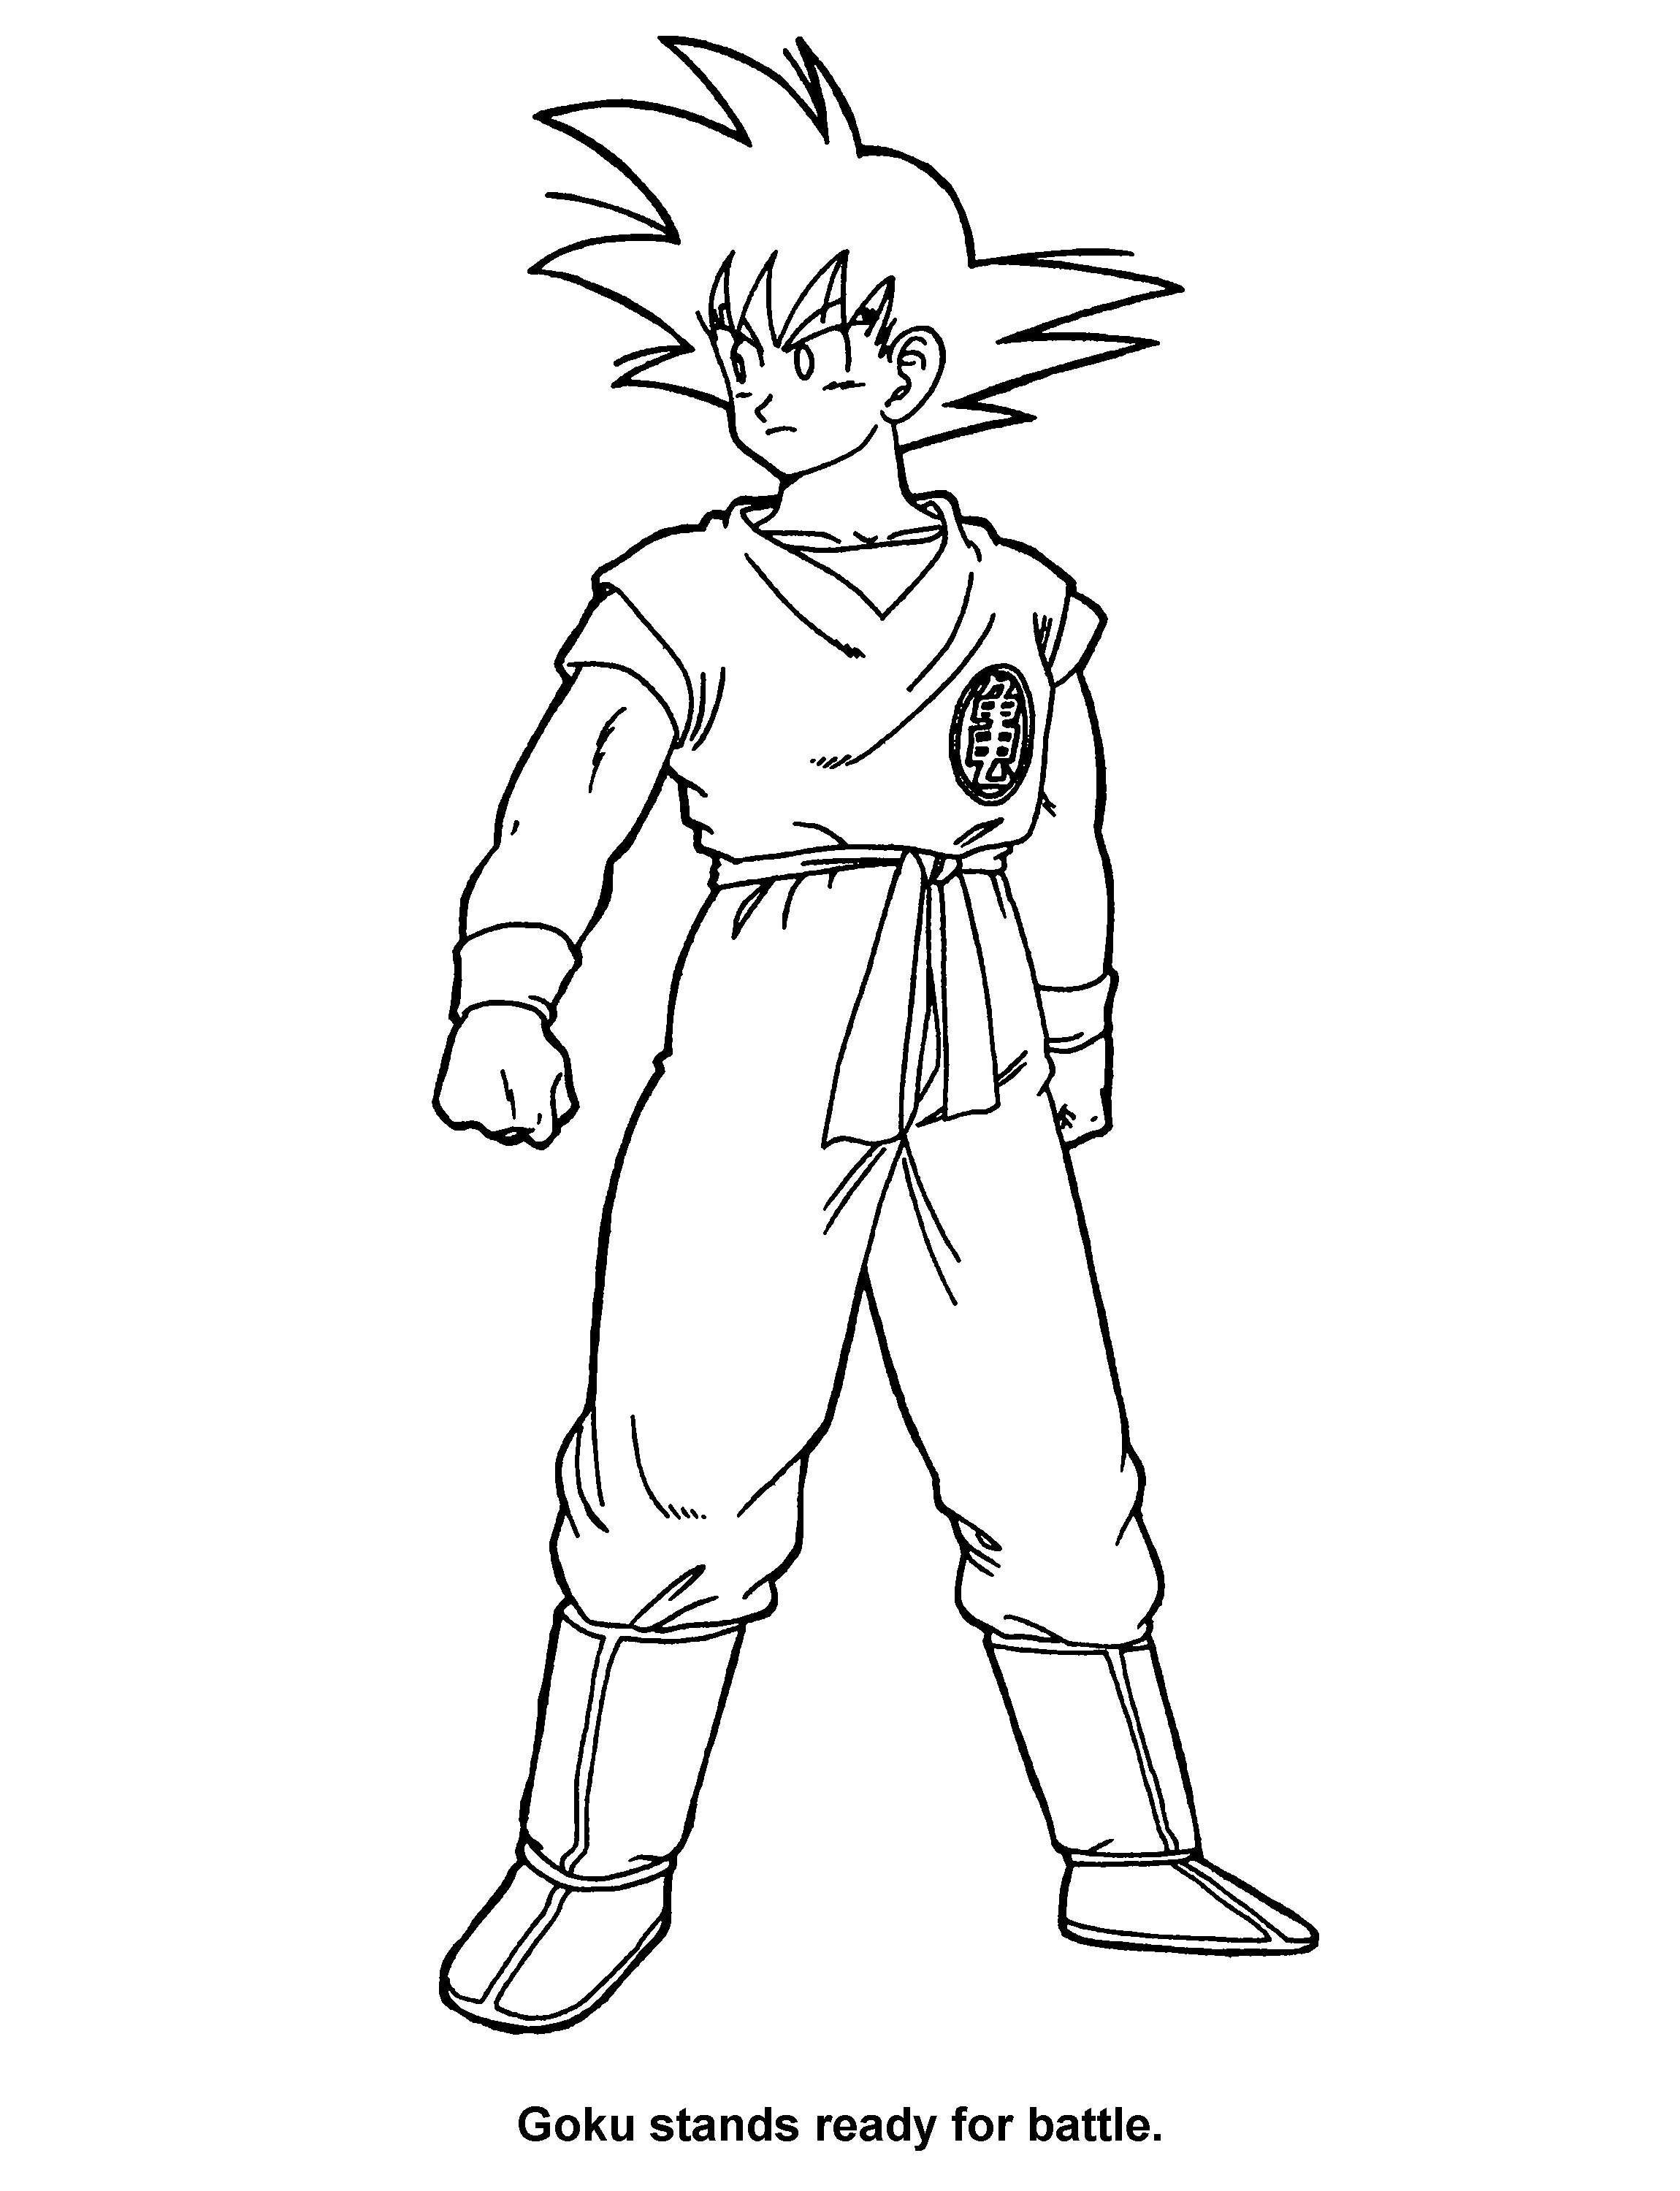 Dragon ball z Coloring Pages - Coloringpages1001.com